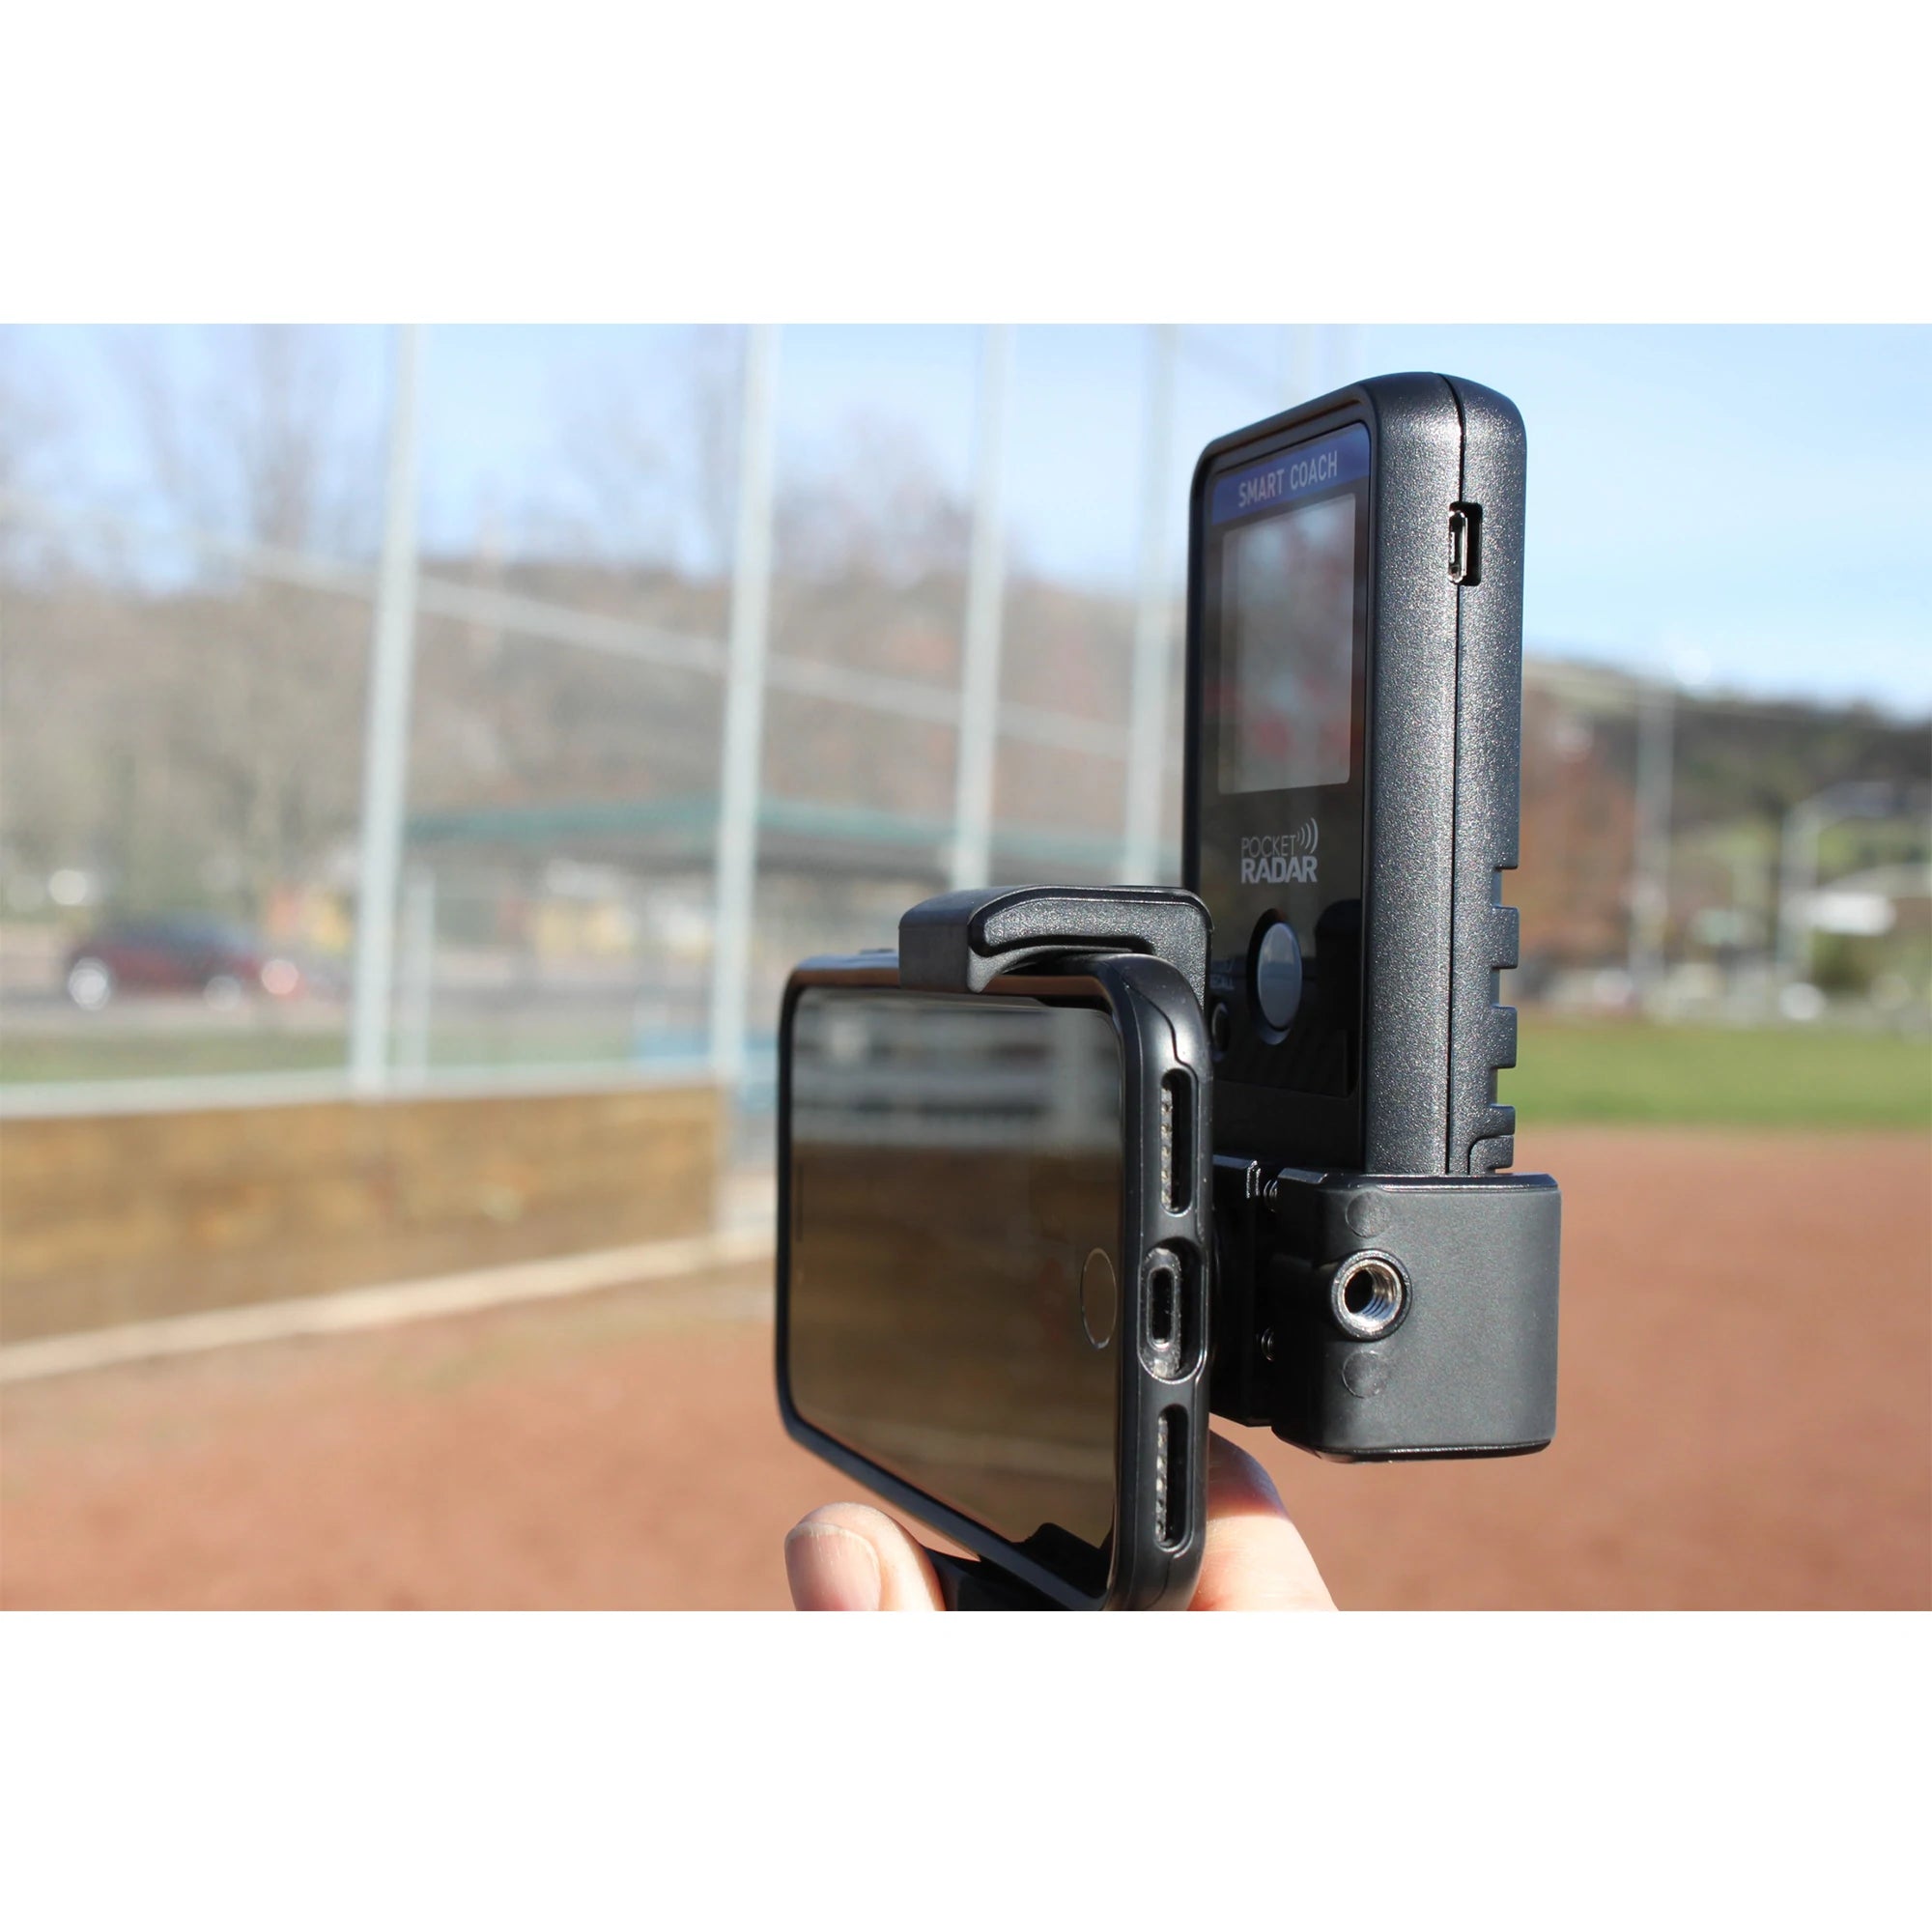 Universal Mount with Pocket Radar and Phone Attached